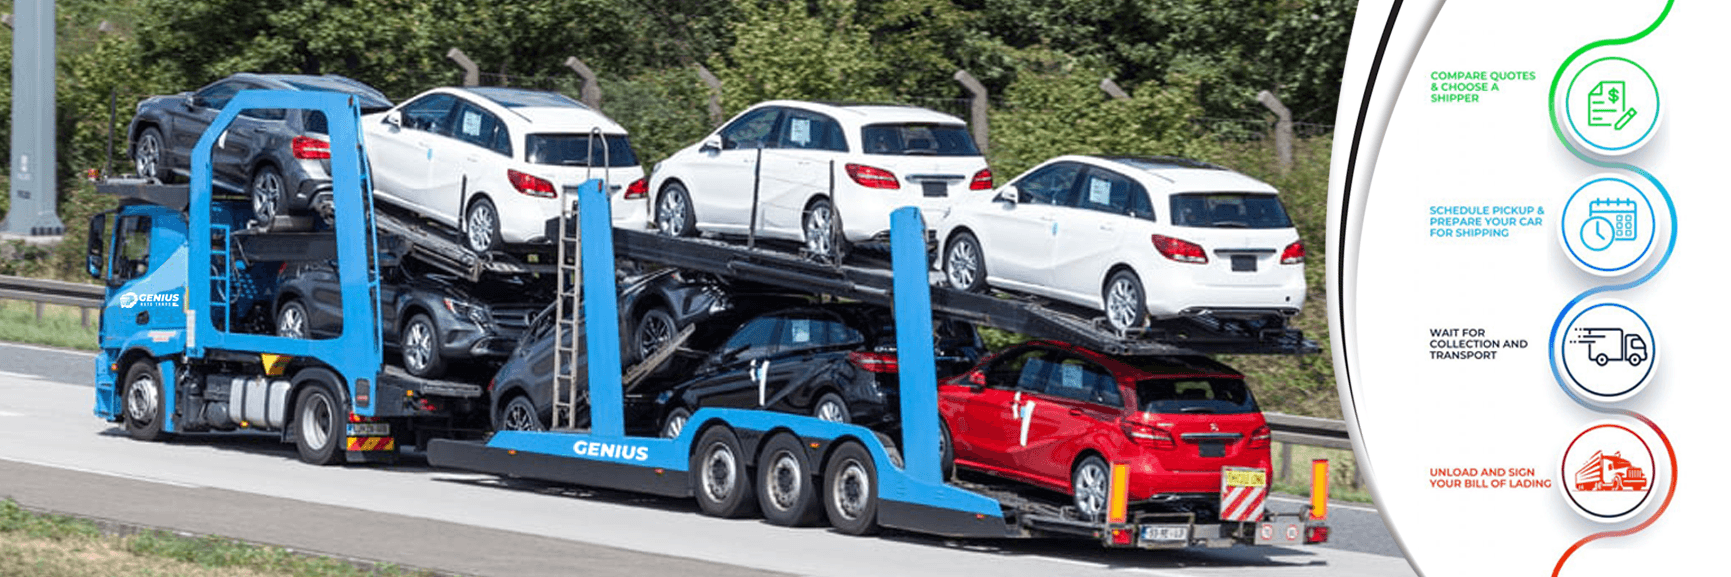 How Long Does It Take to Ship a Car? Genius Auto Trans Guide